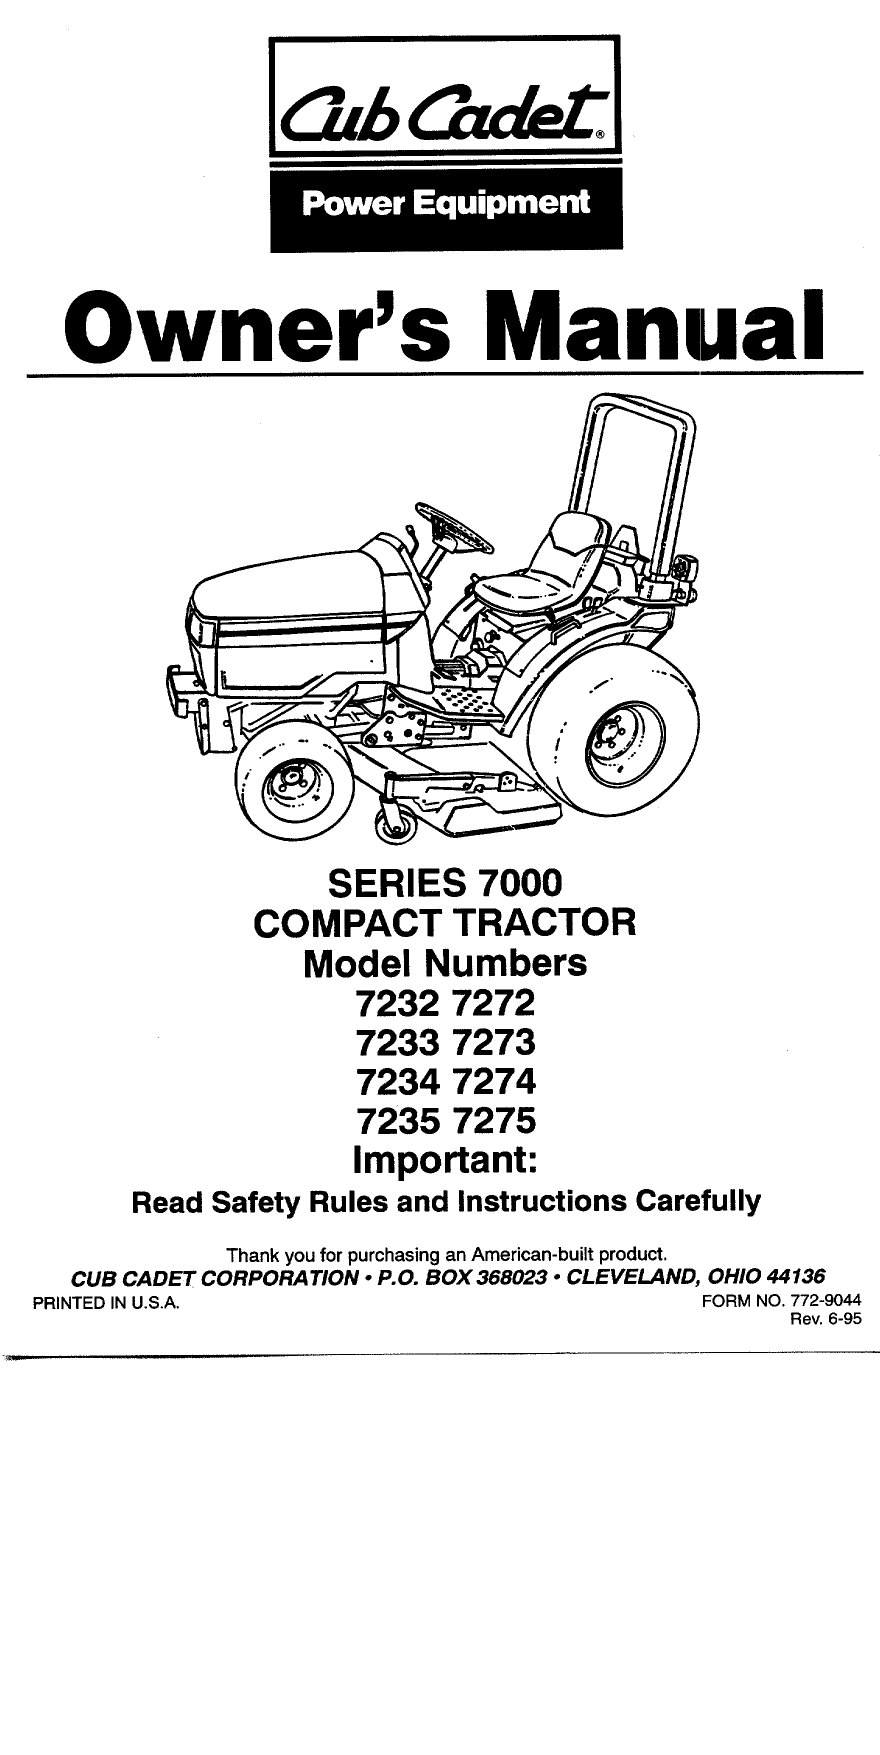 1996-1997 Cub Cadet 7232, 7233, 7234, 7235, 7272, 7273, 7274, 7275 owner´s manual Preview image 6